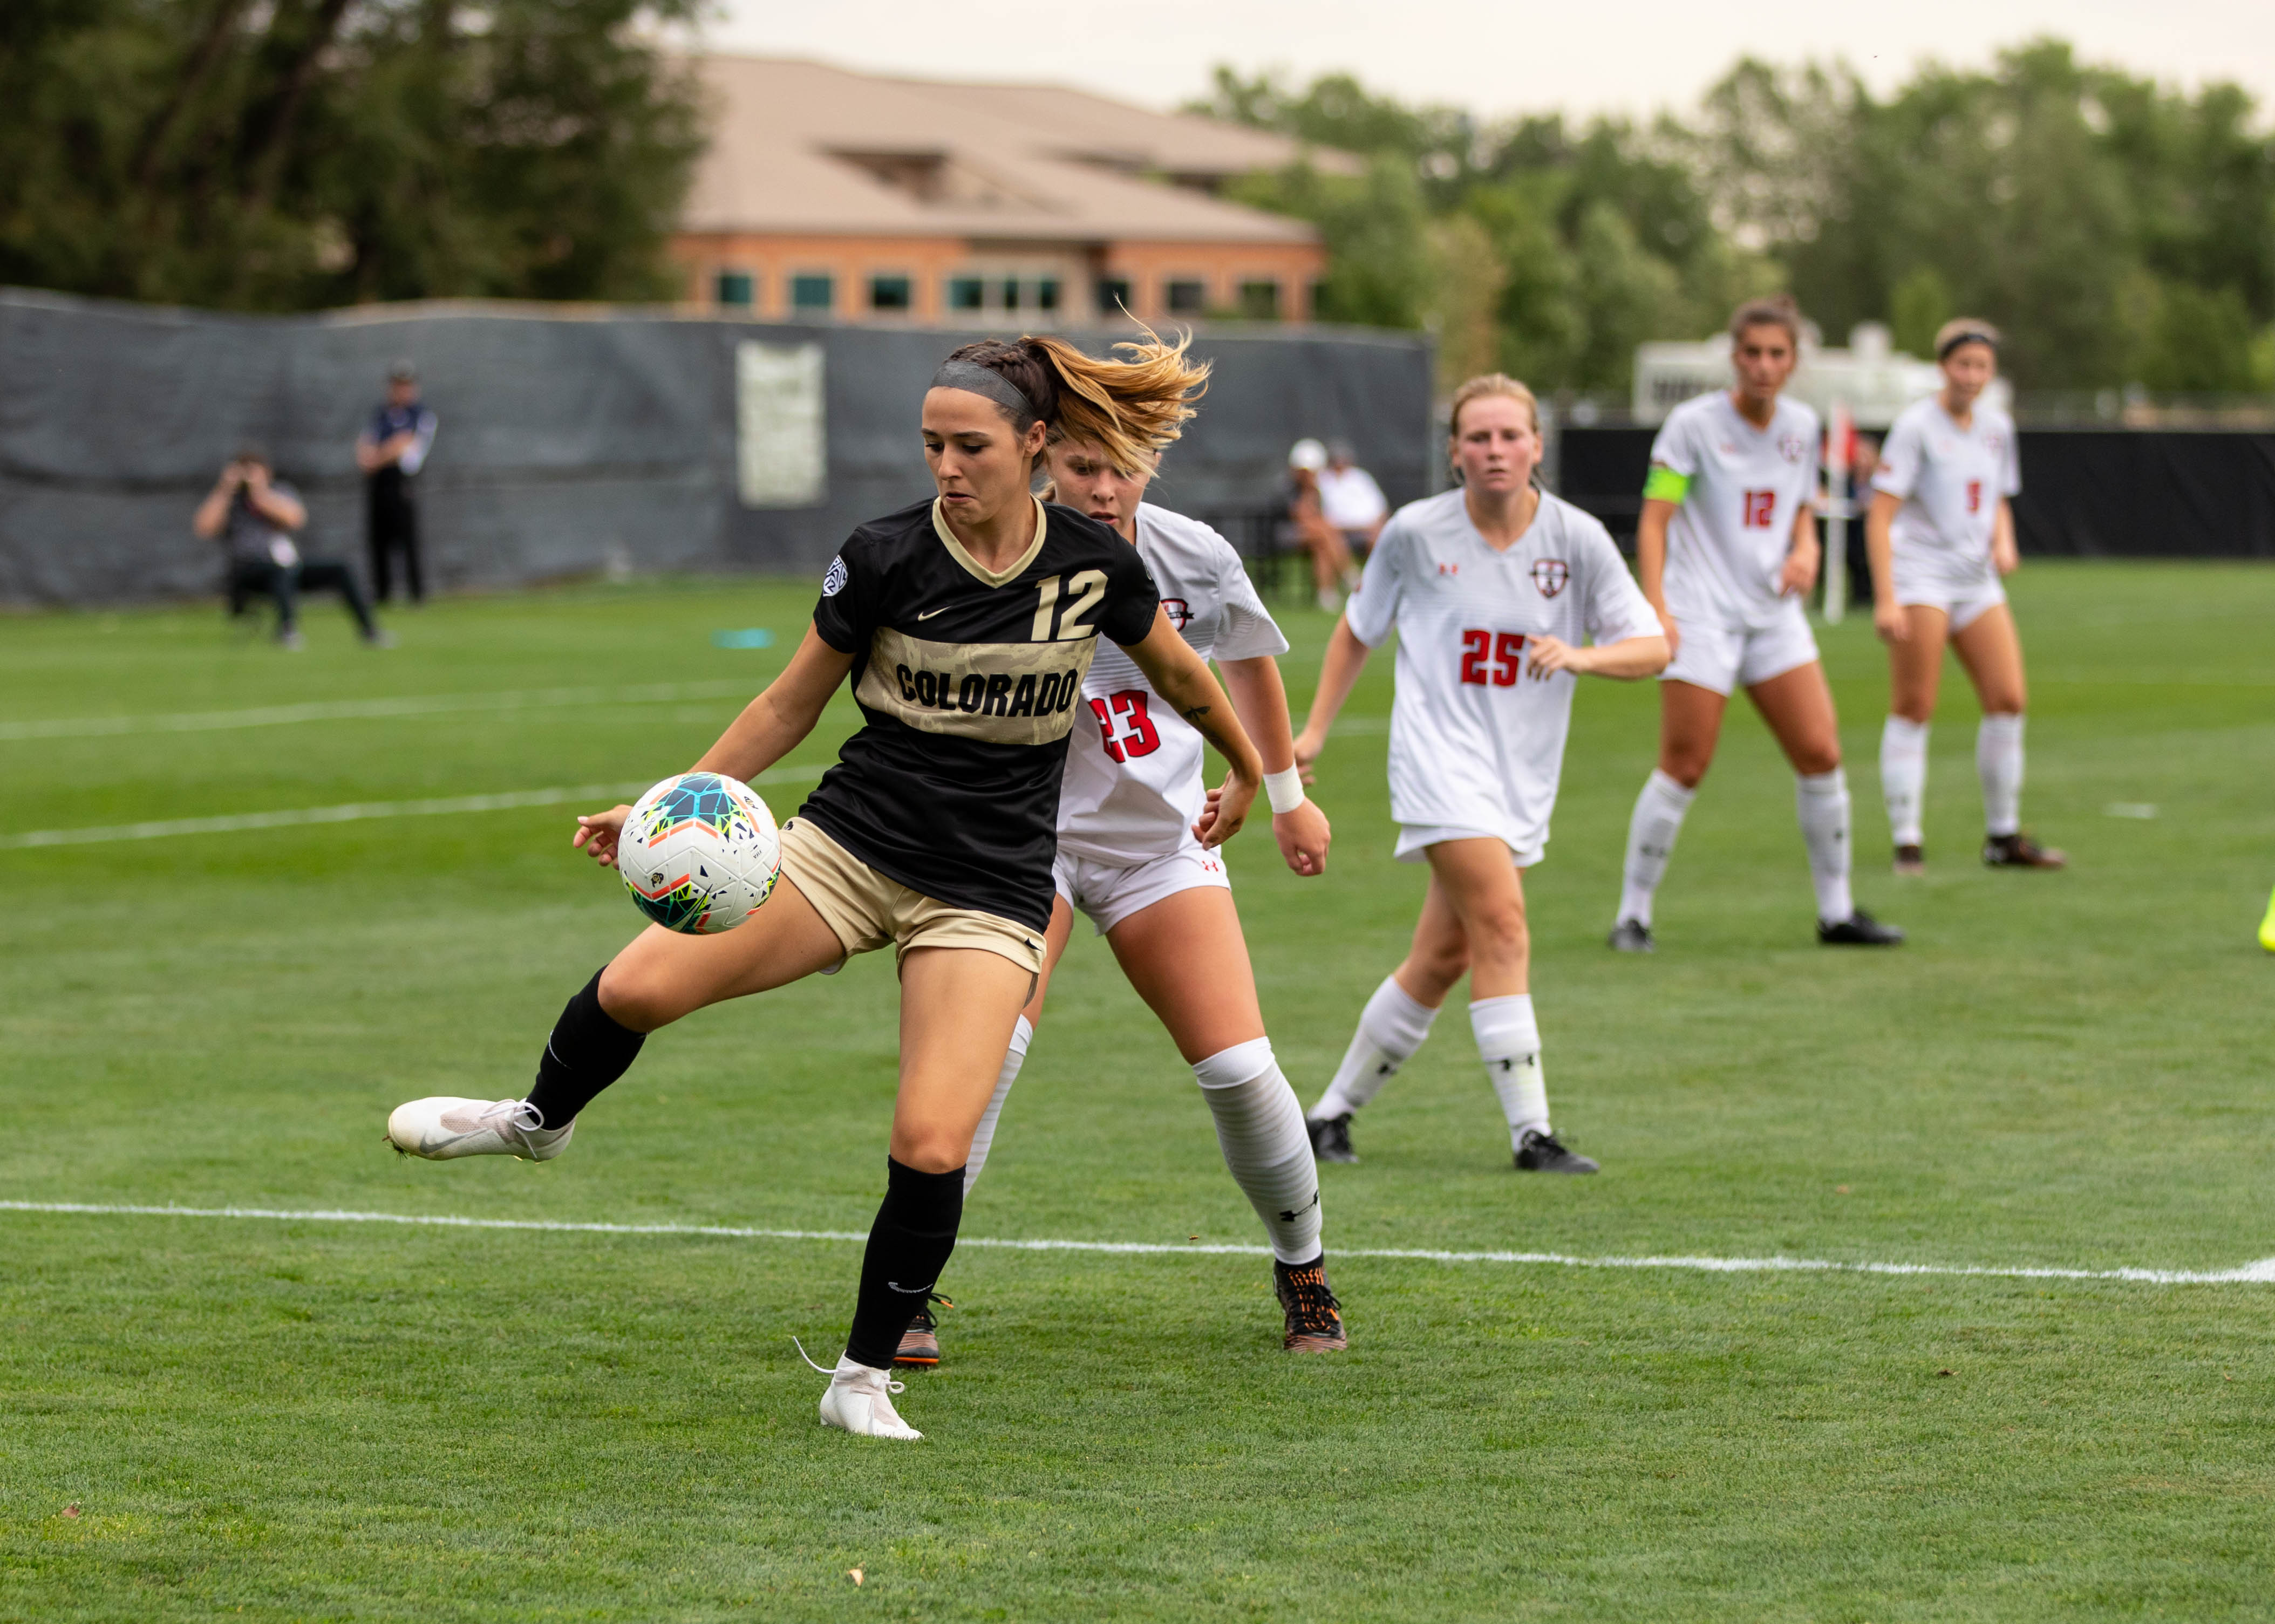 The wait is over CU soccer season preview